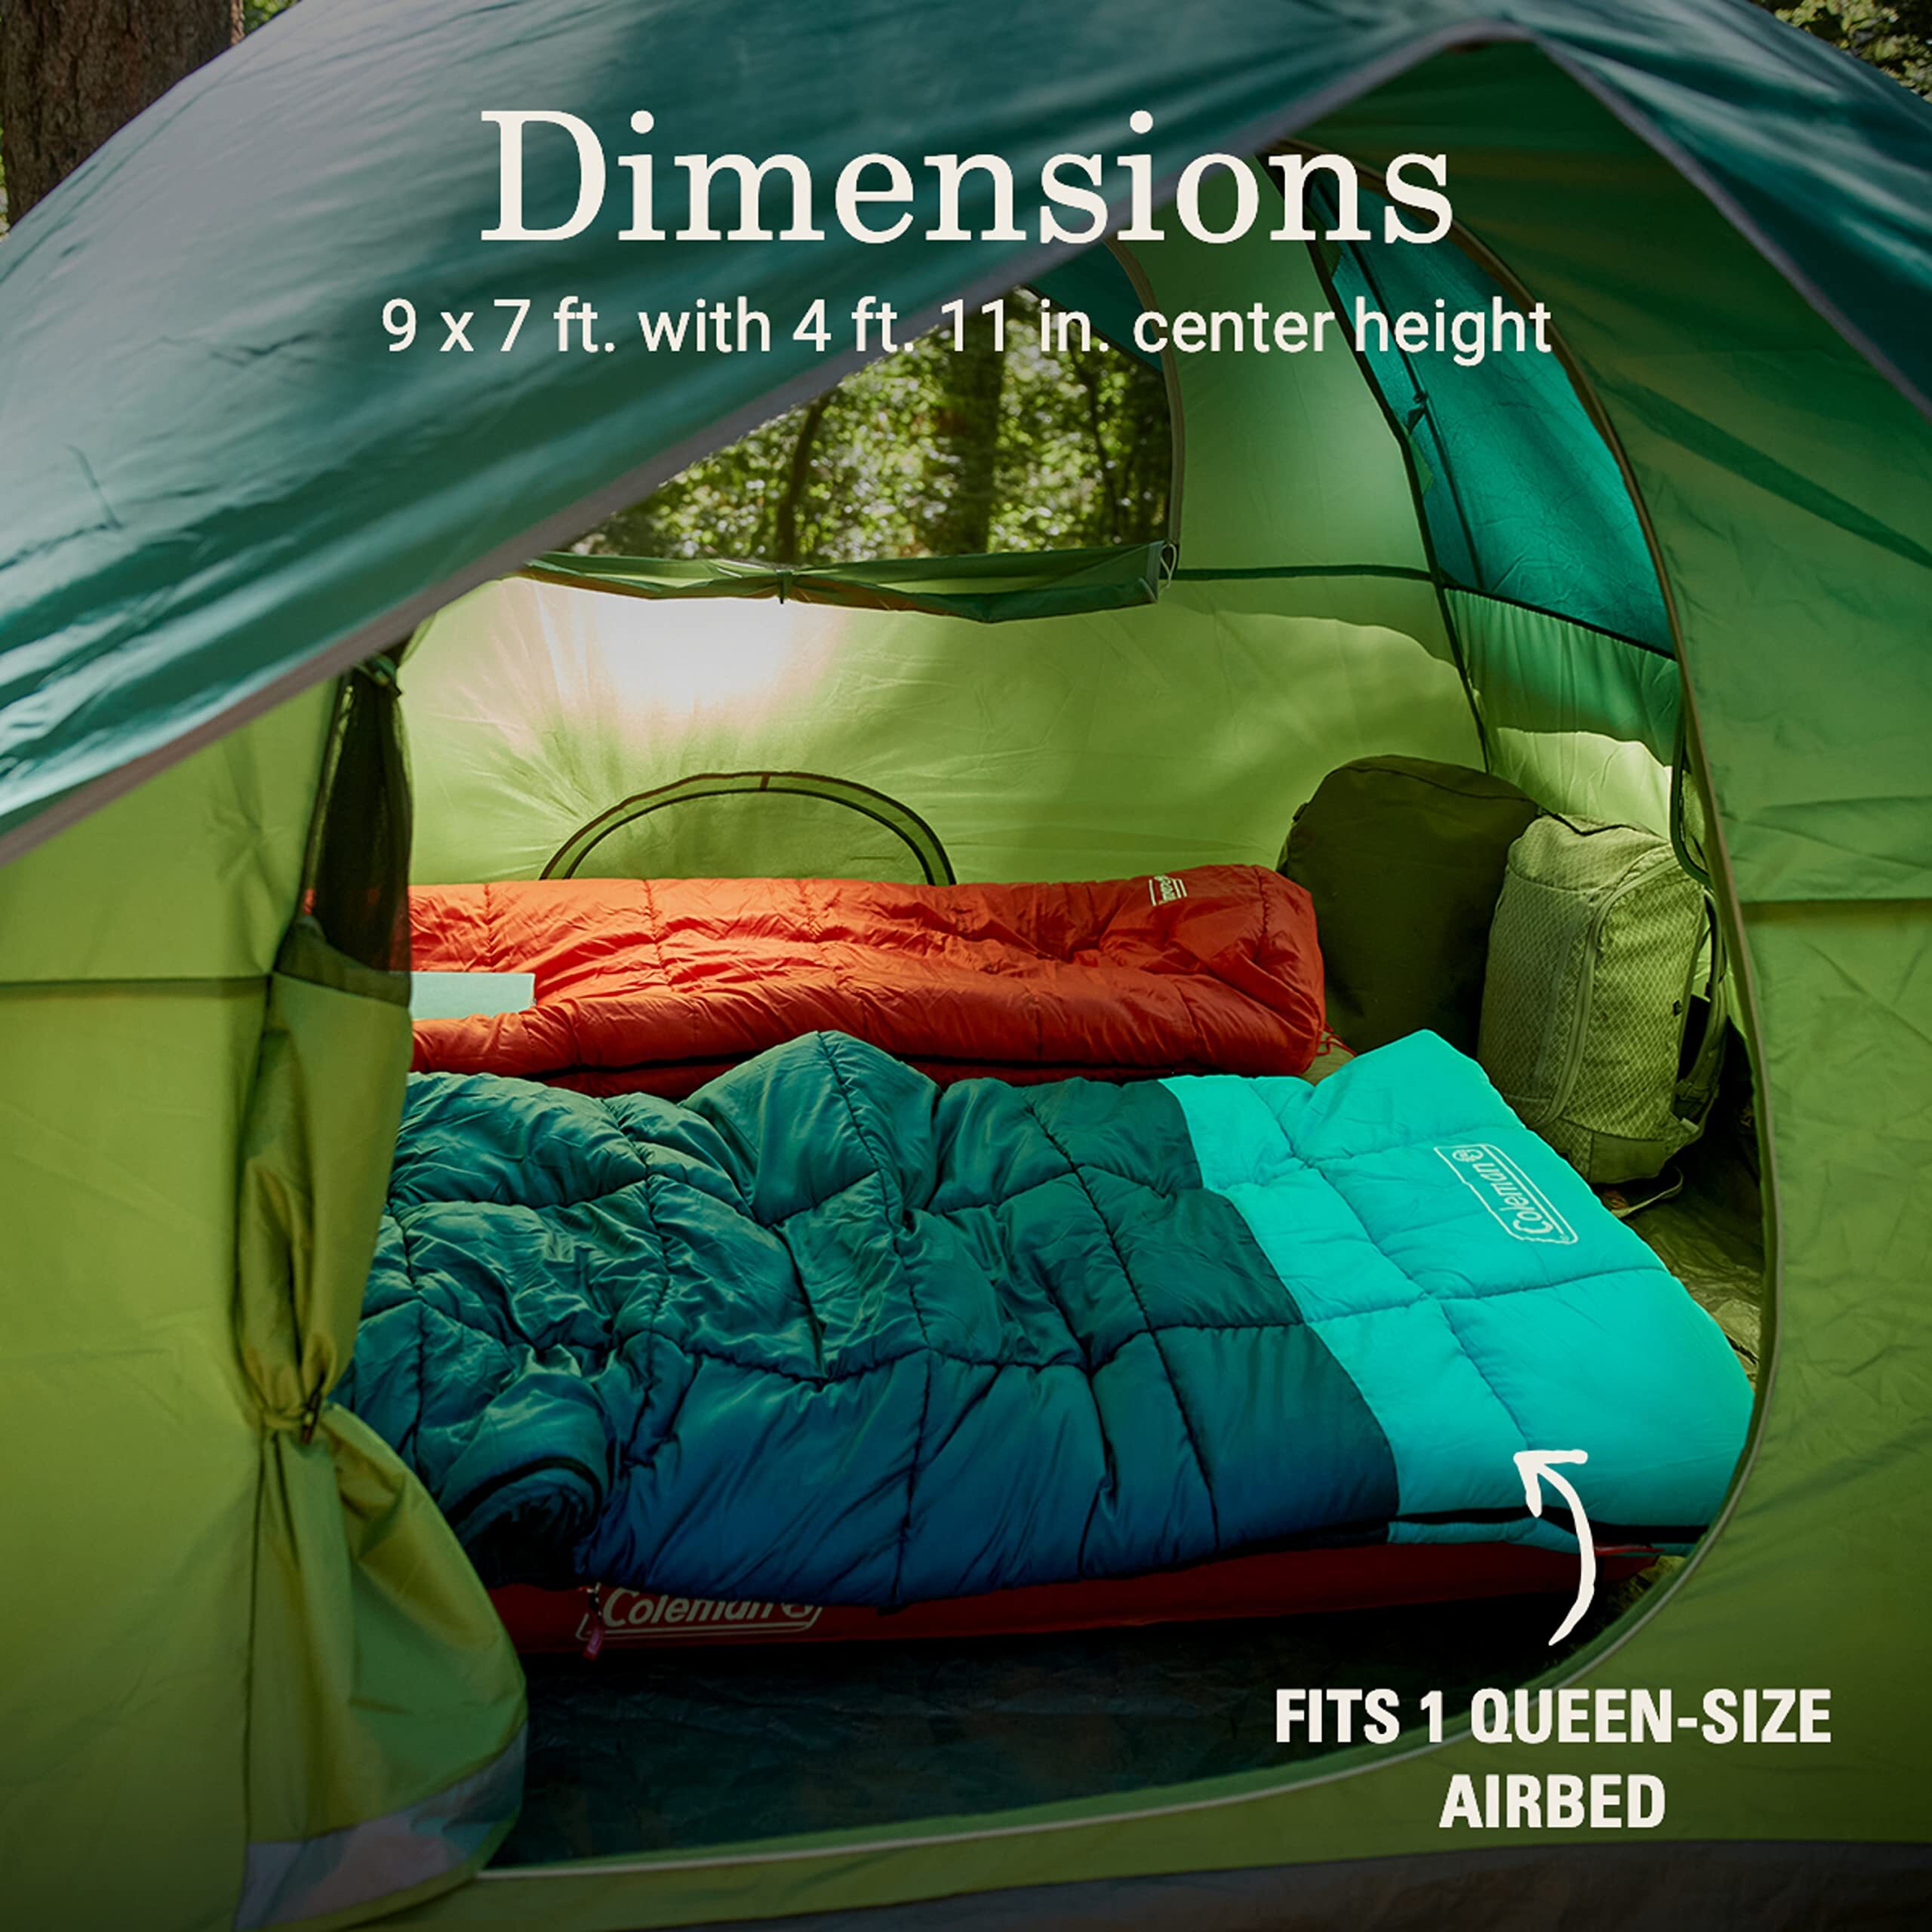 Camping Tent2-4